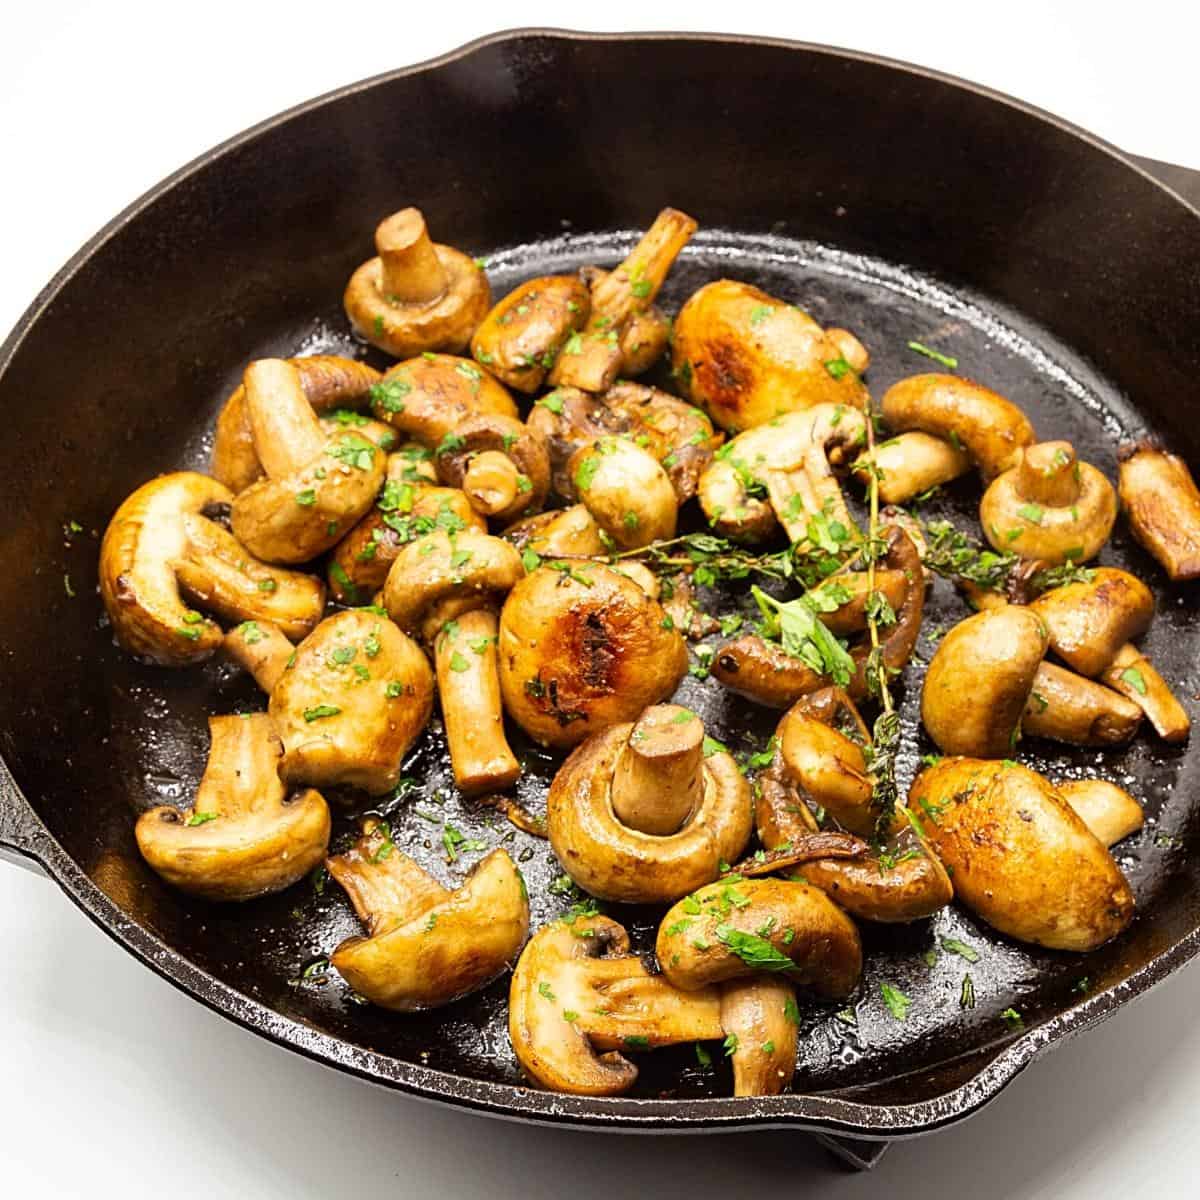 A skillet with sauteed mushrooms.